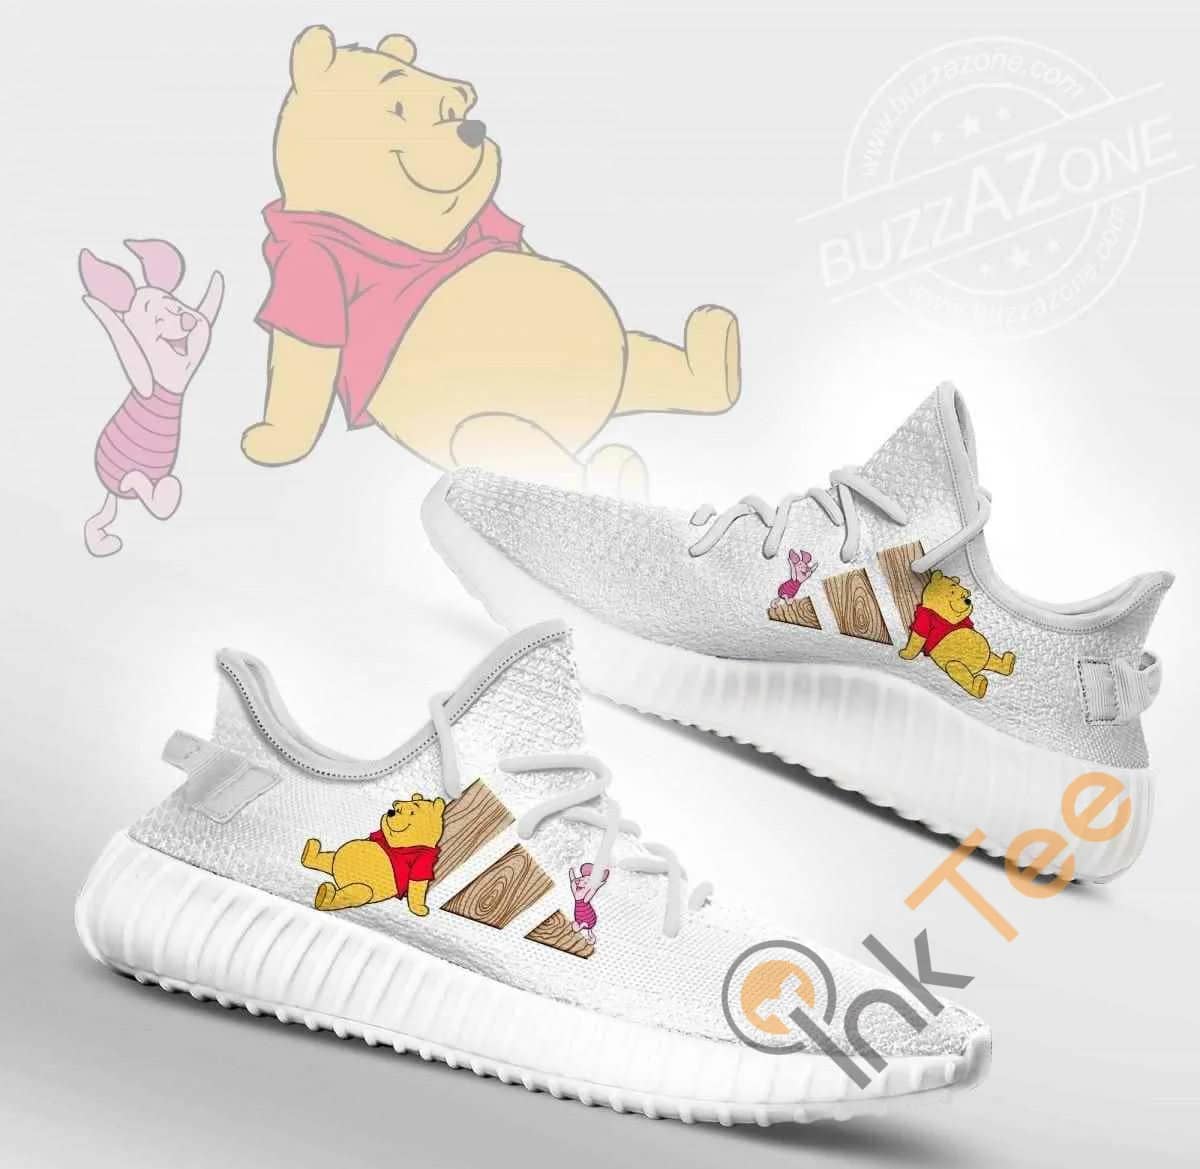 Pooh And Piglet Custom Amazon Best Selling Yeezy Boost